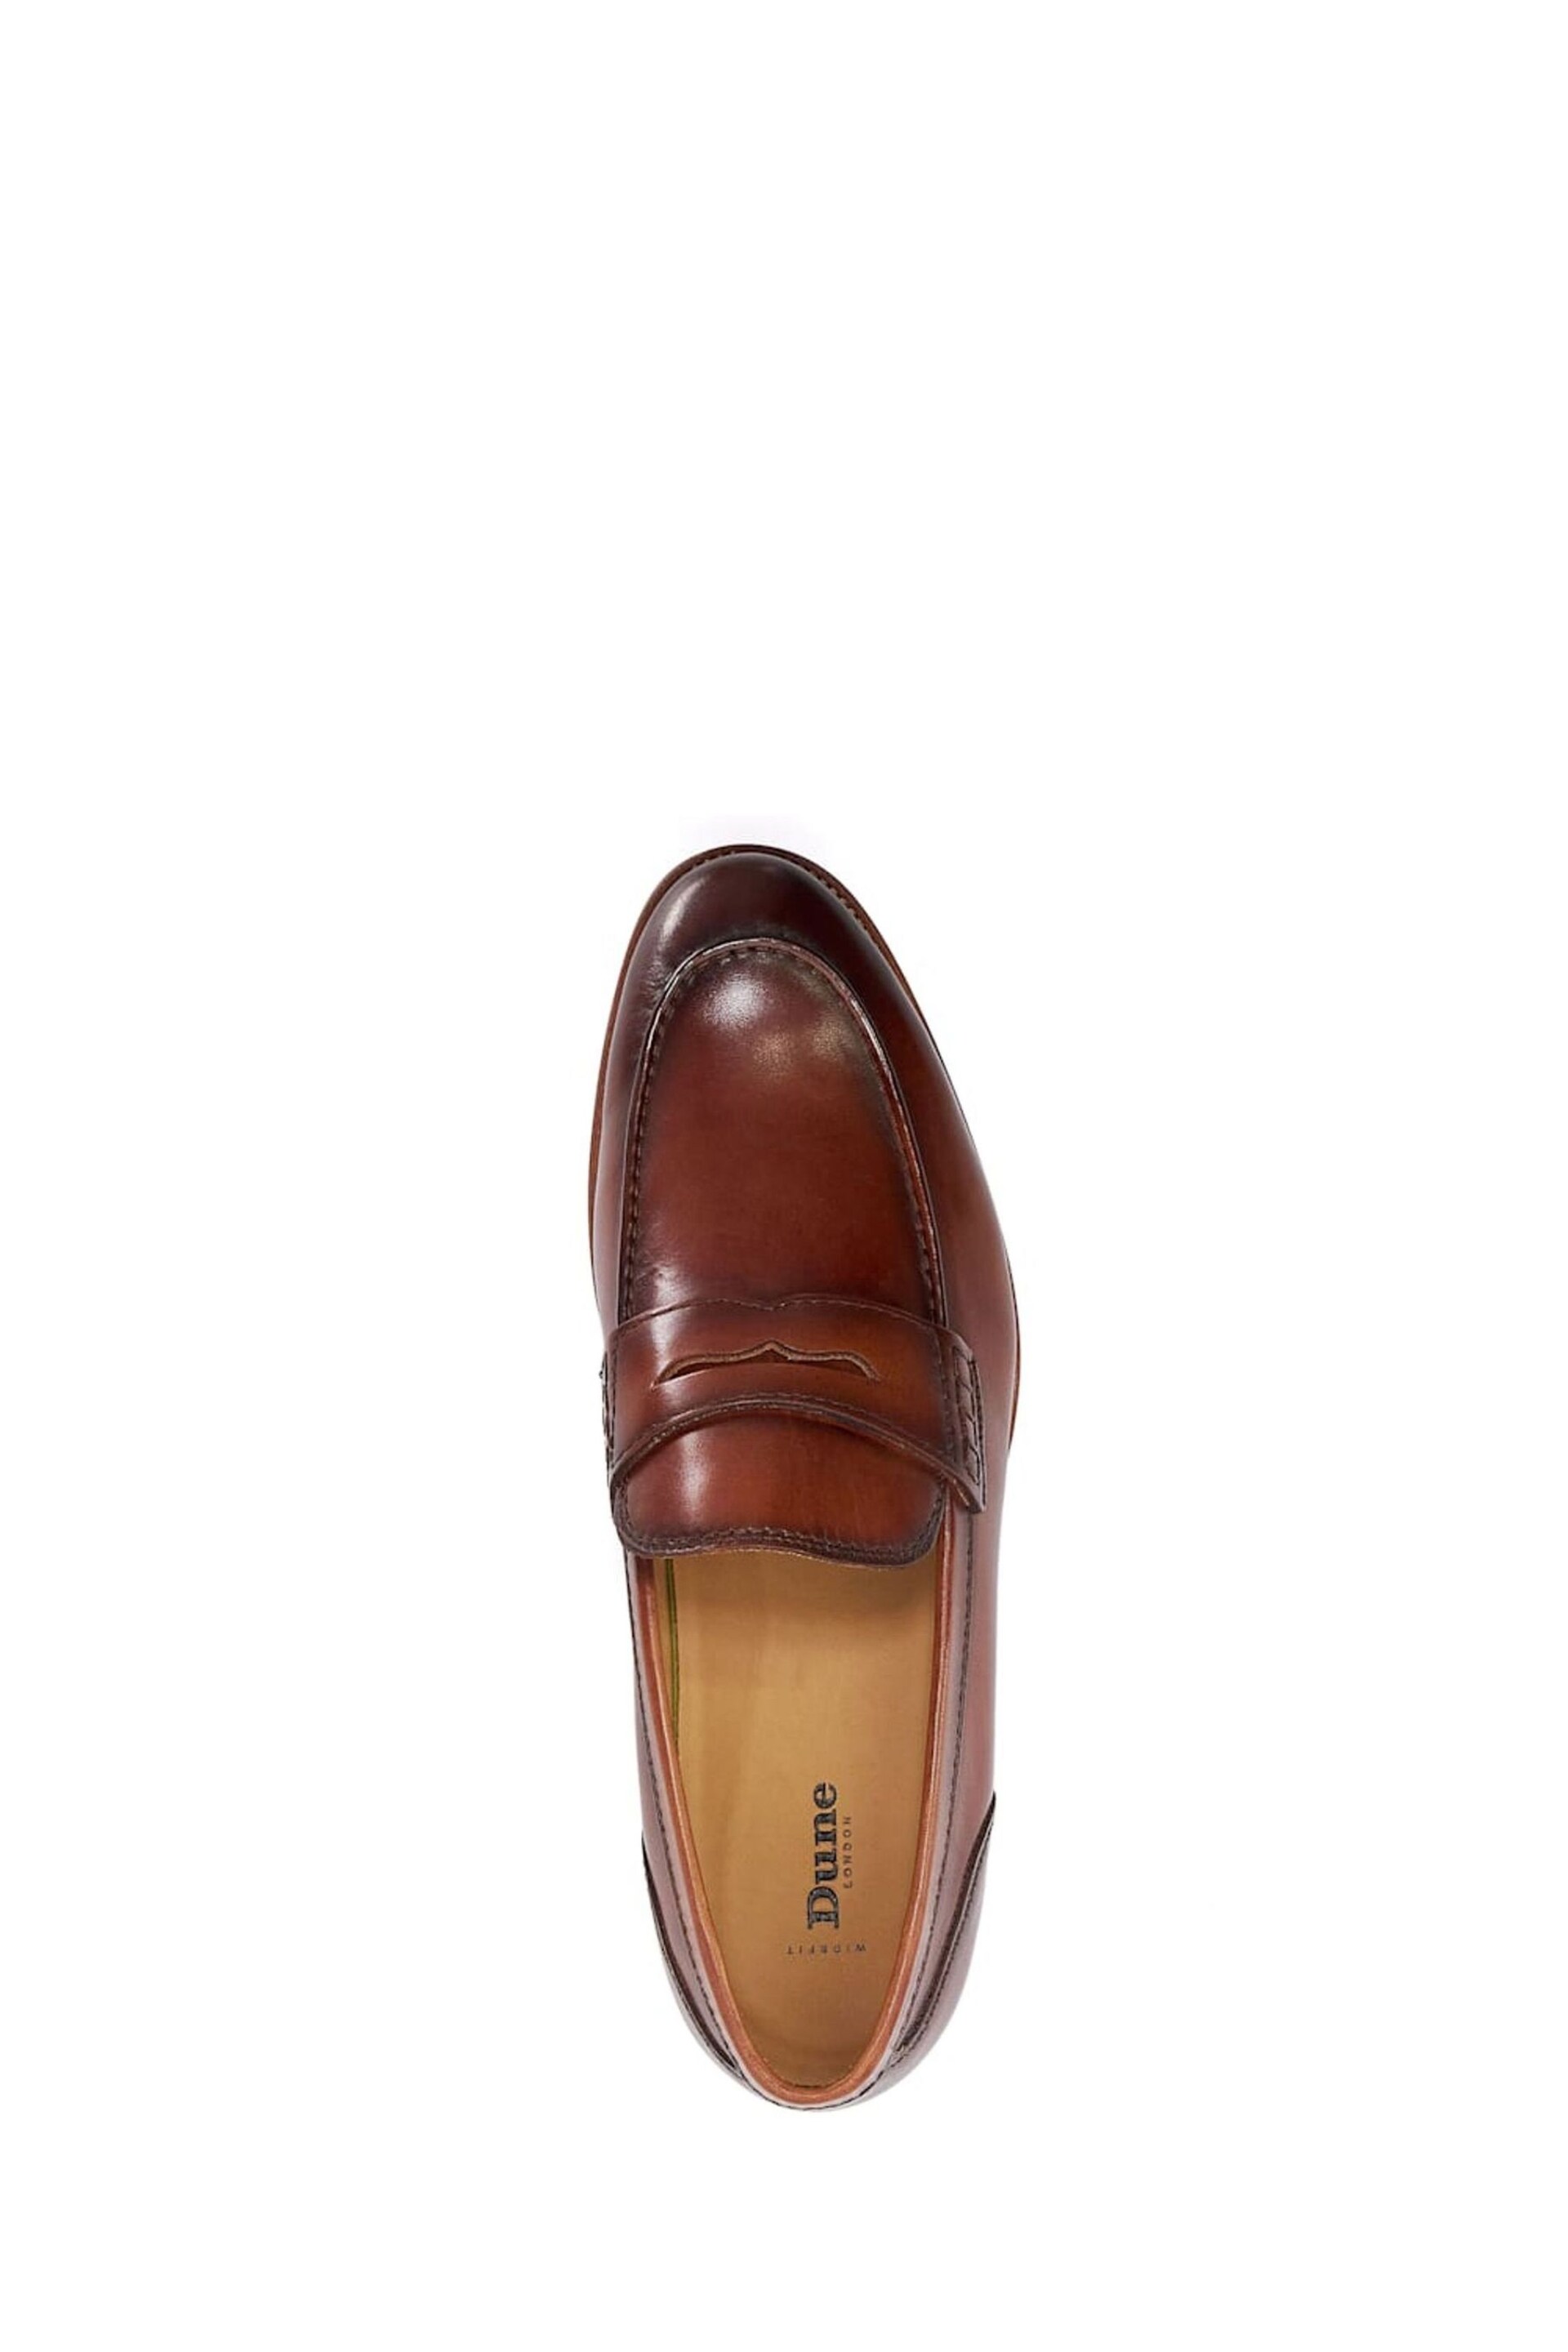 Dune London Brown Wide Fit Sulli Sole Penny Loafers - Image 4 of 6